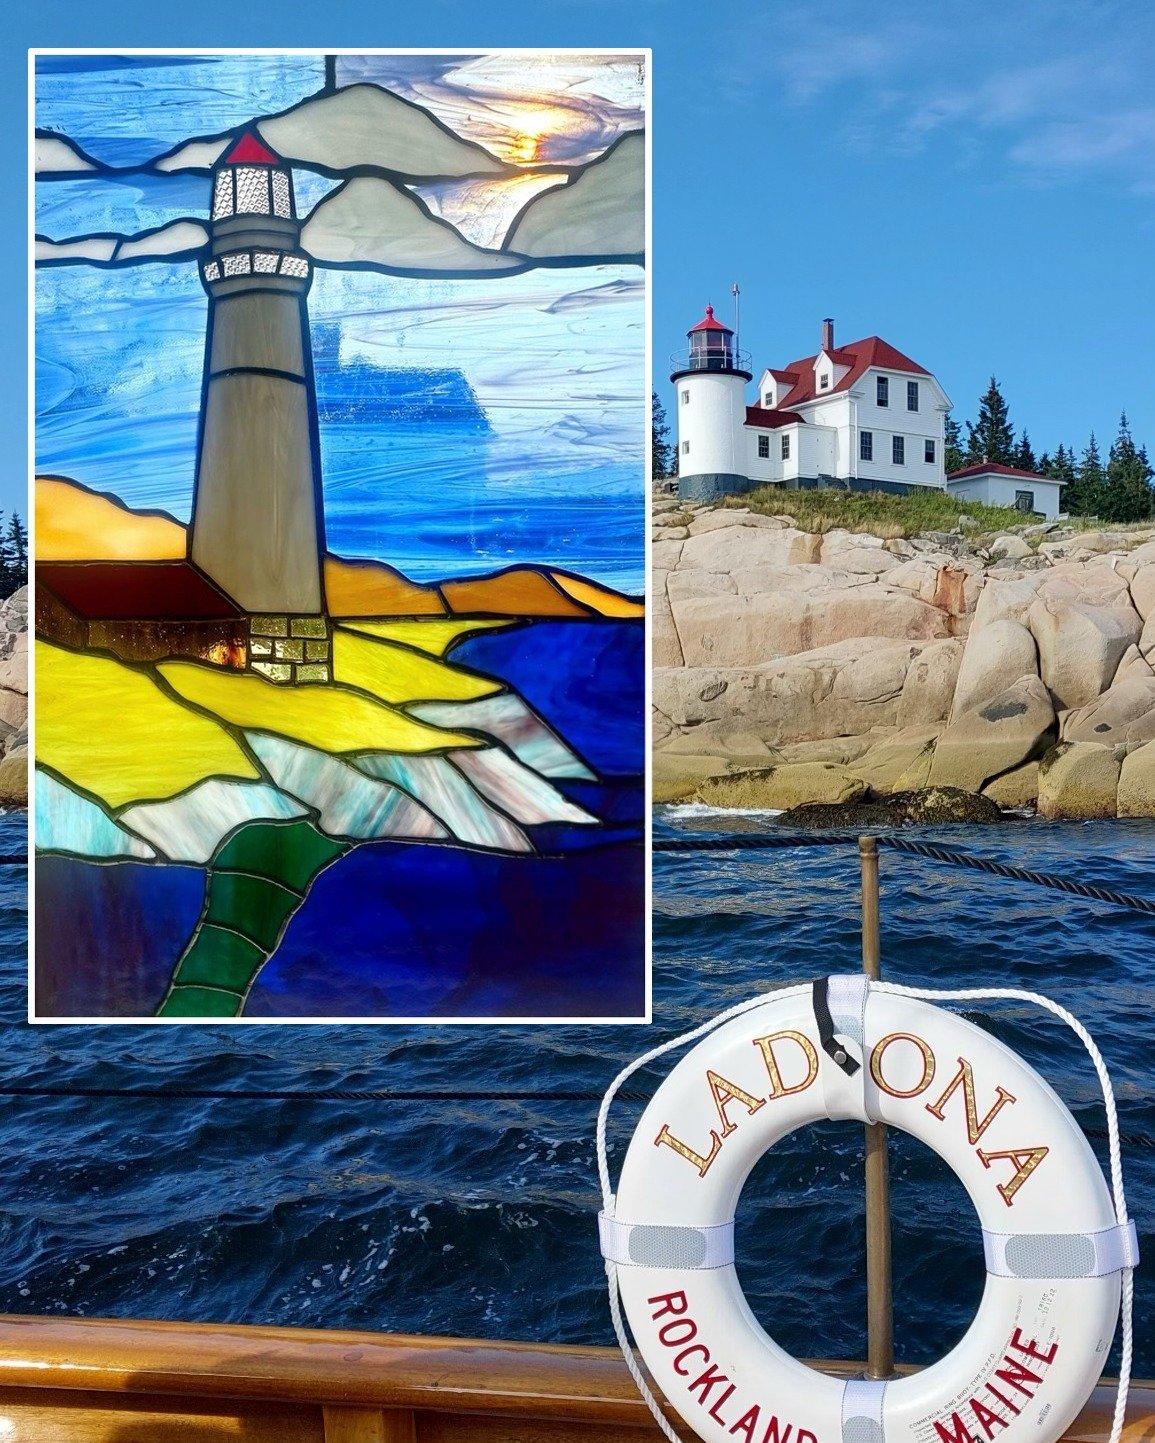 Get INSPIRED on the #SchoonerLadona!

We can't take credit for Jay McNulty's @honuglobal talent, but we can take credit for his view during last June's sail that inspired his latest stained glass masterpiece.

Book your inspirational sail before Marc